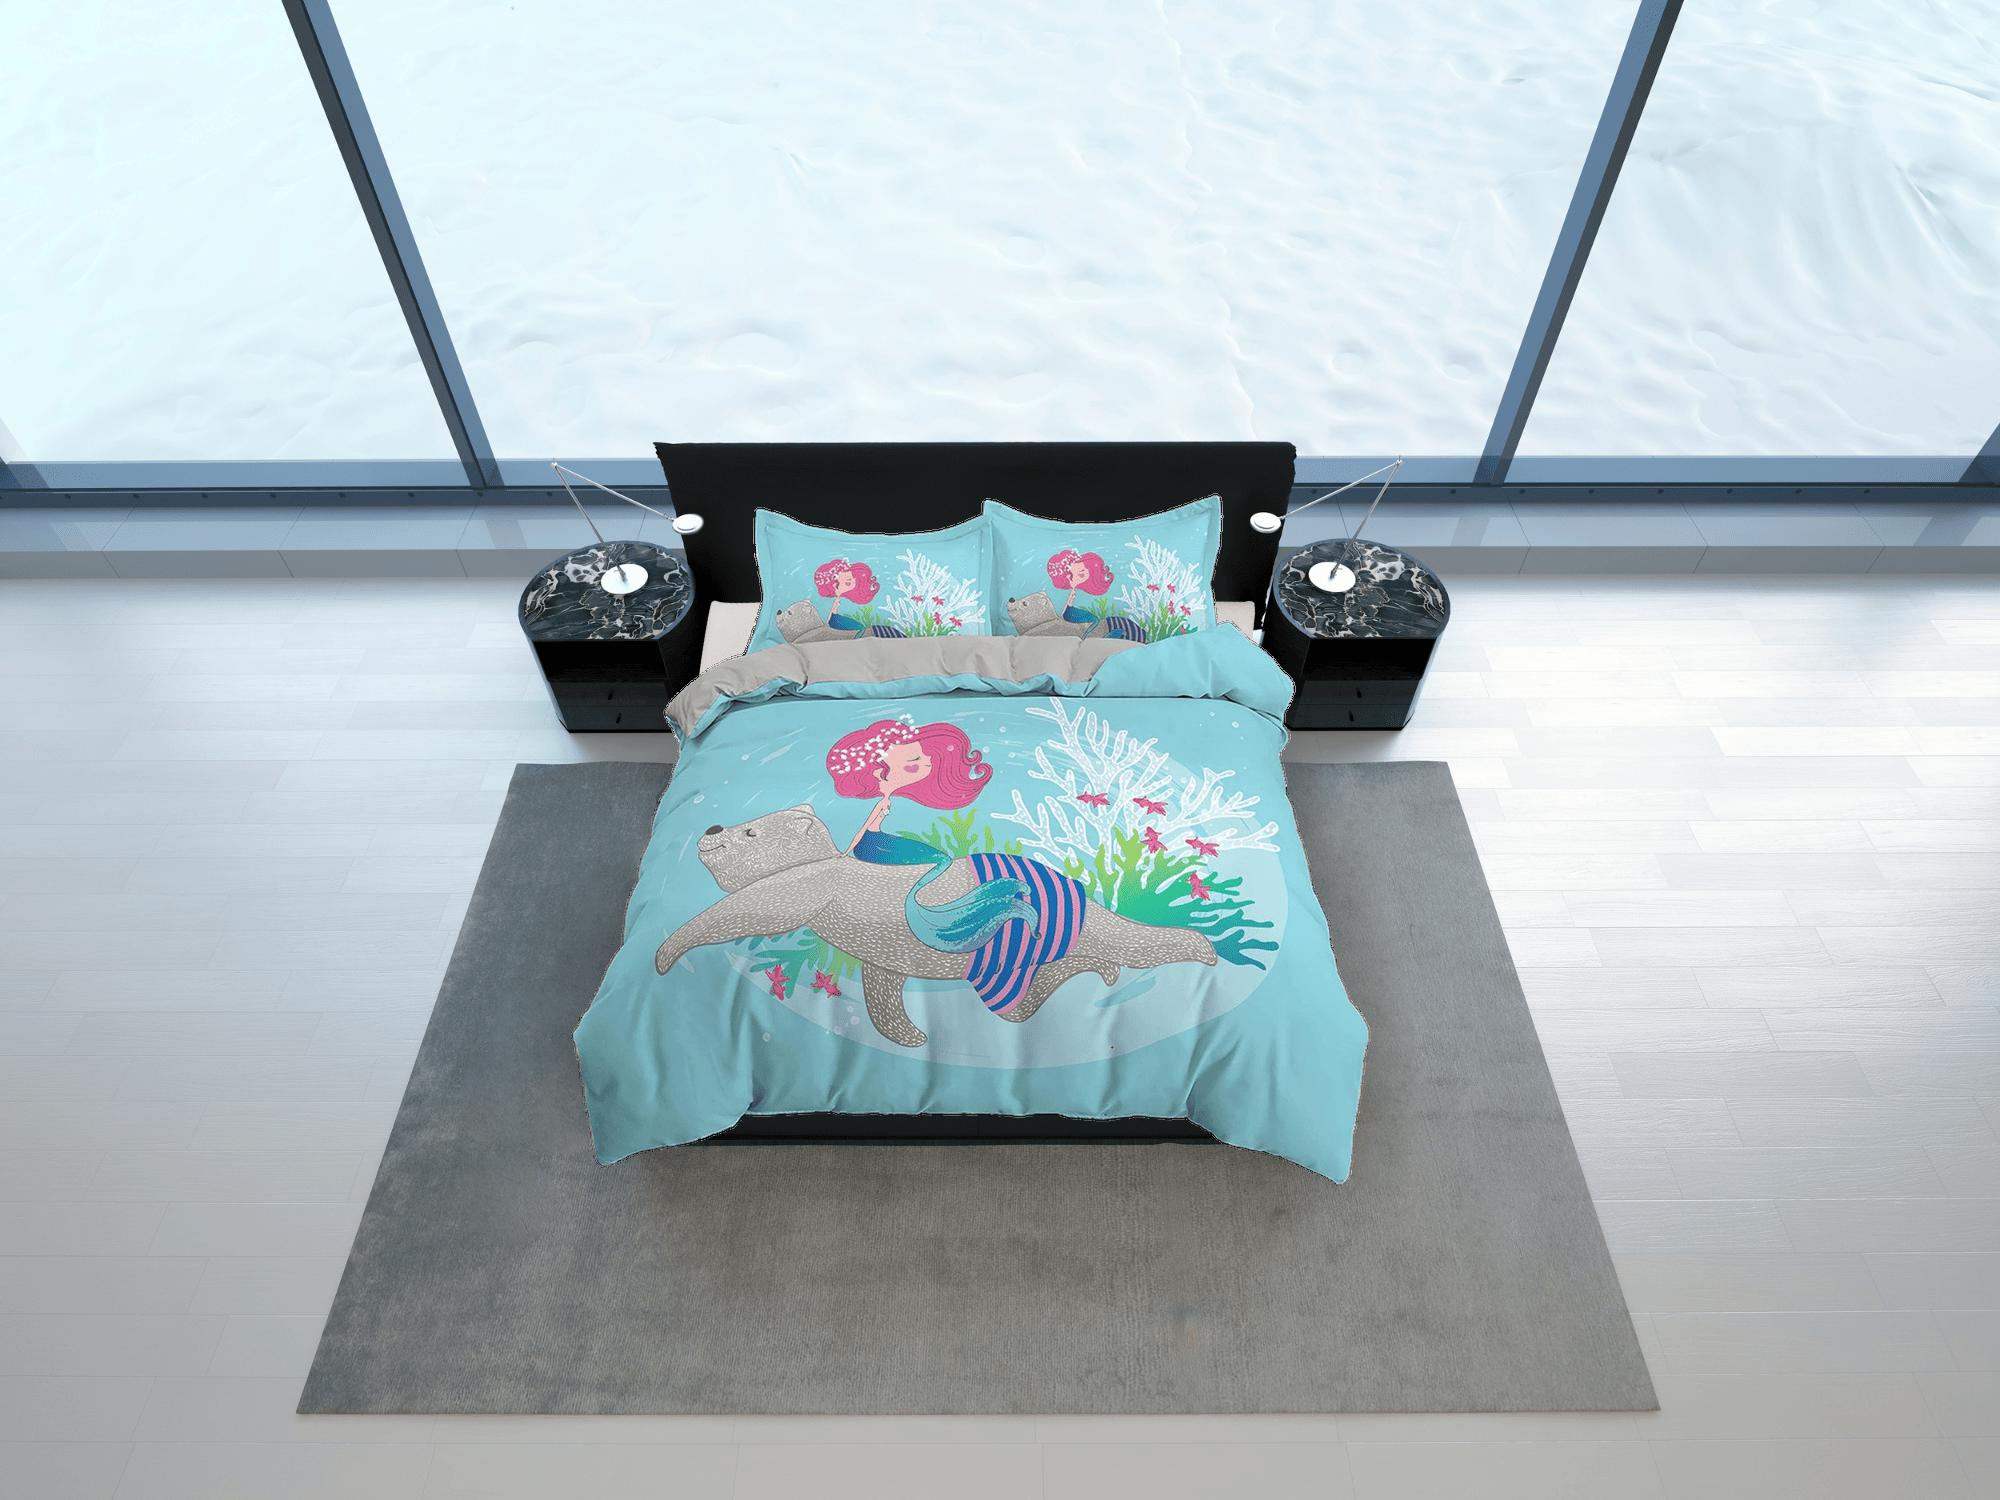 daintyduvet Little mermaid and grizzly bear, toddler bedding, unique duvet cover, crib bedding & pillowcase, baby zipper bedding, king queen full twin